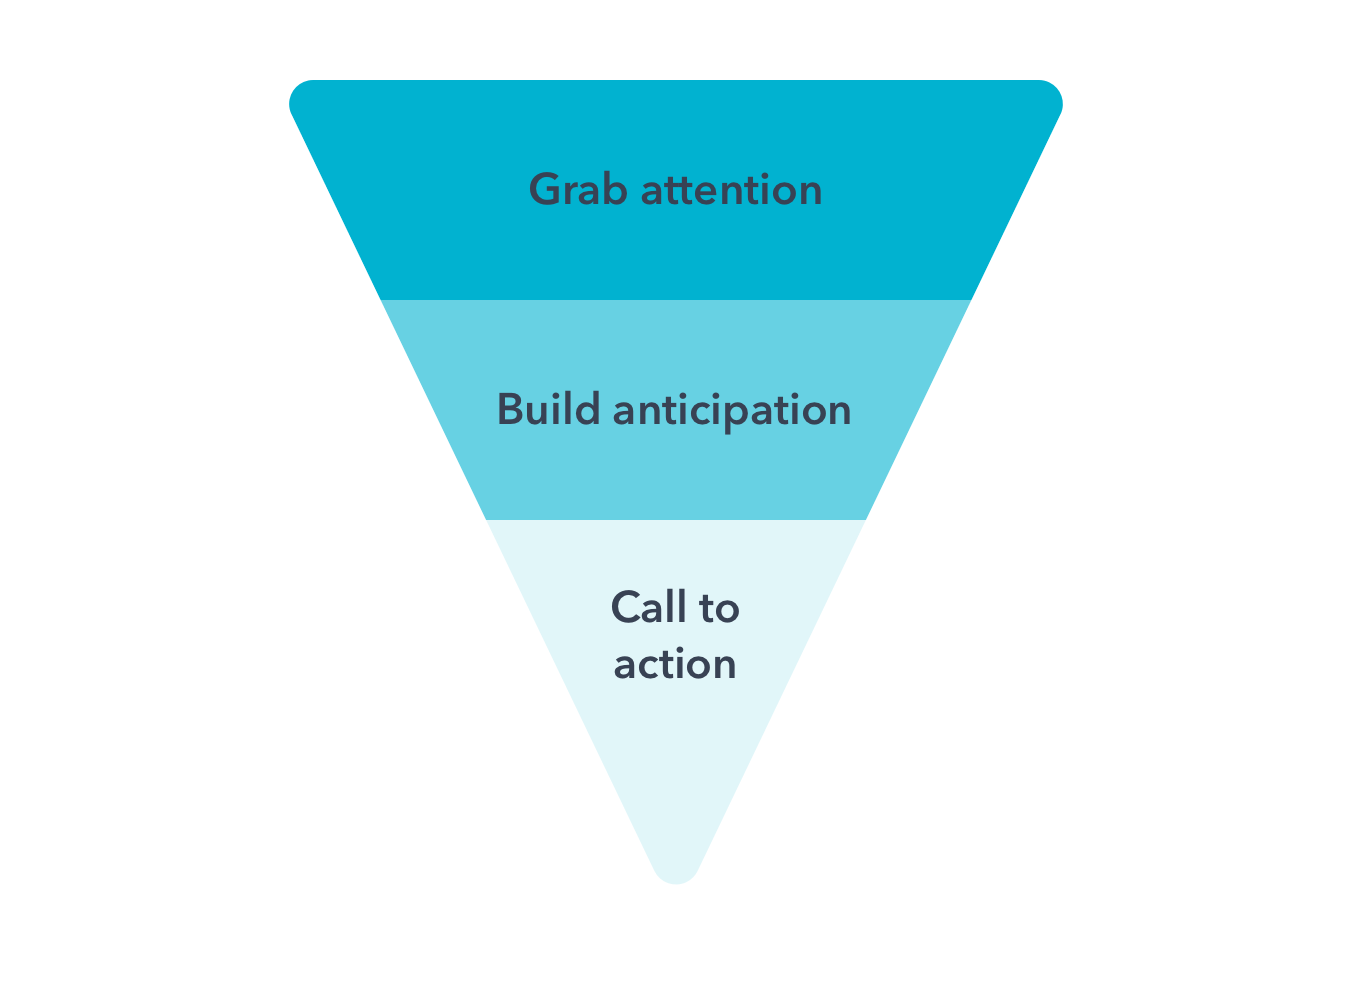 email-marketing-best-practices-inverted-pyramid@2x